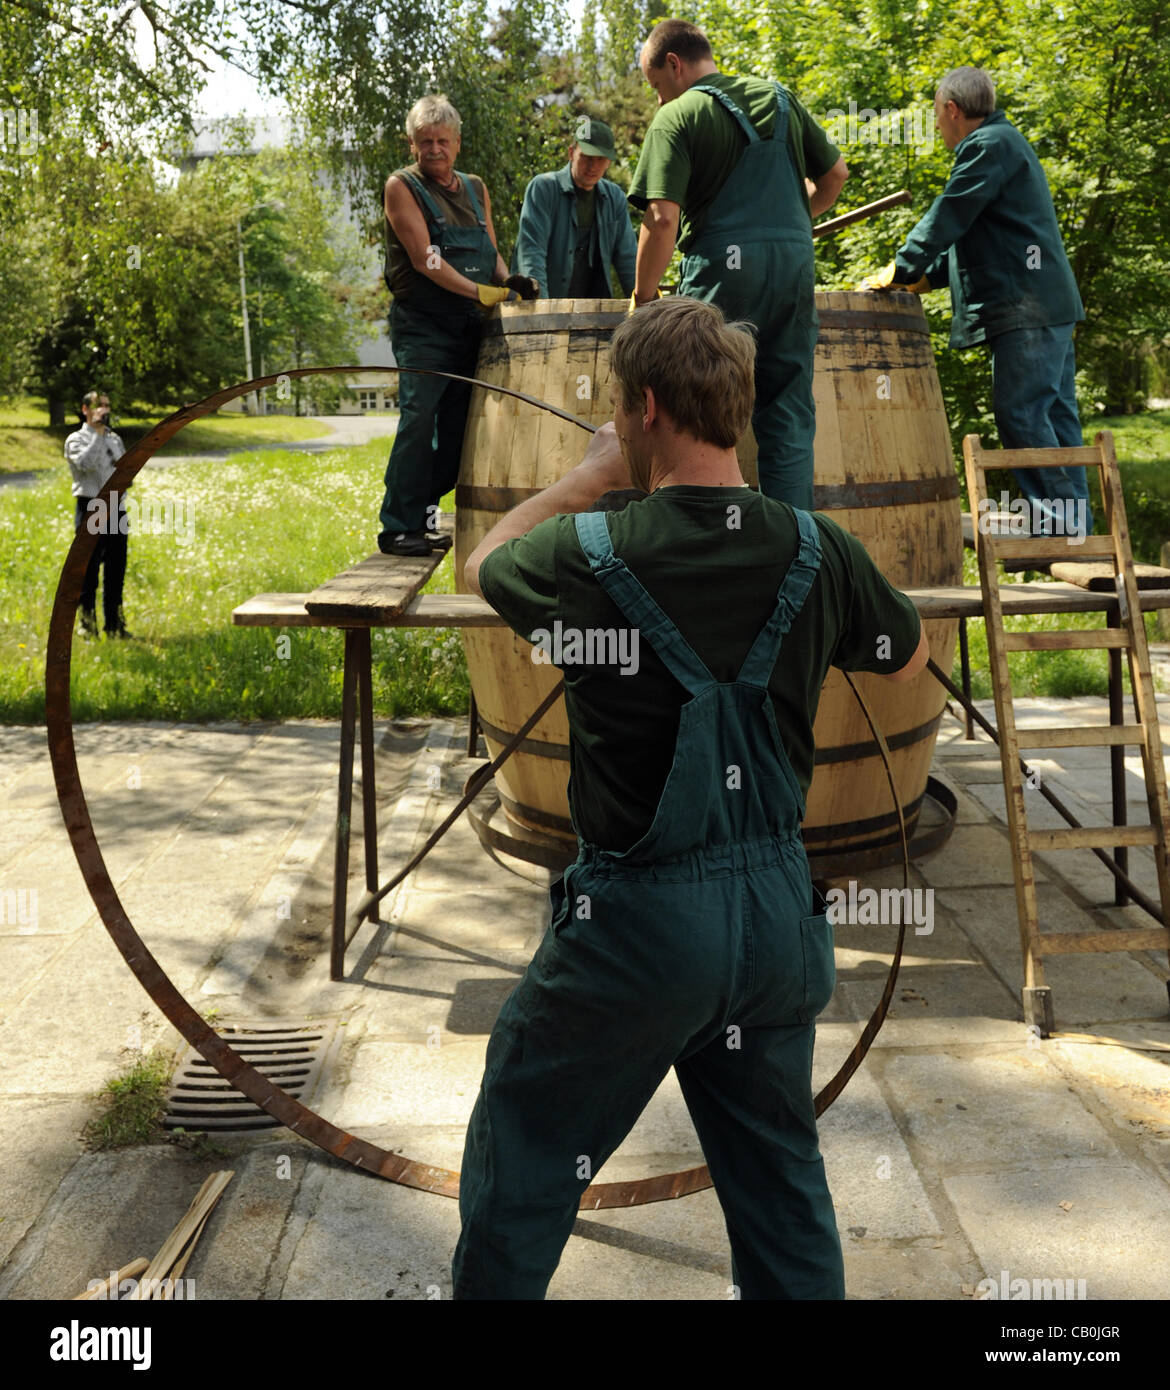 Coopers roll make a giant wooden barrel in the Pilsner Urquell brewery in Plzen (Pilsen) on May 15, 2012. The brewery still uses traditional woooden barrels for a small part of its production. (CTK Photo/Petr Eret) Stock Photo